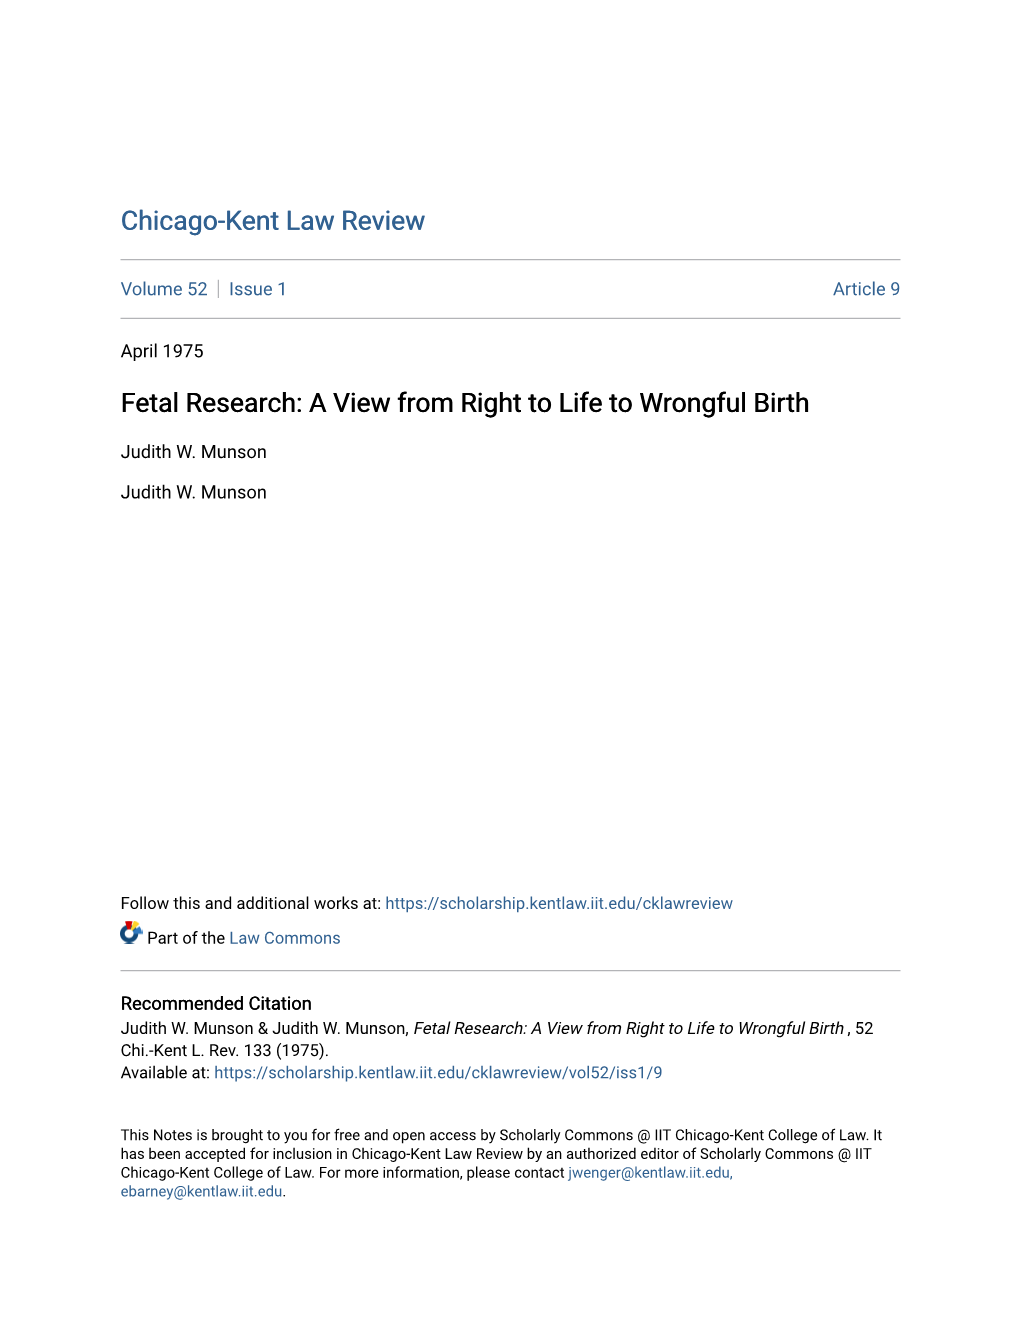 Fetal Research: a View from Right to Life to Wrongful Birth